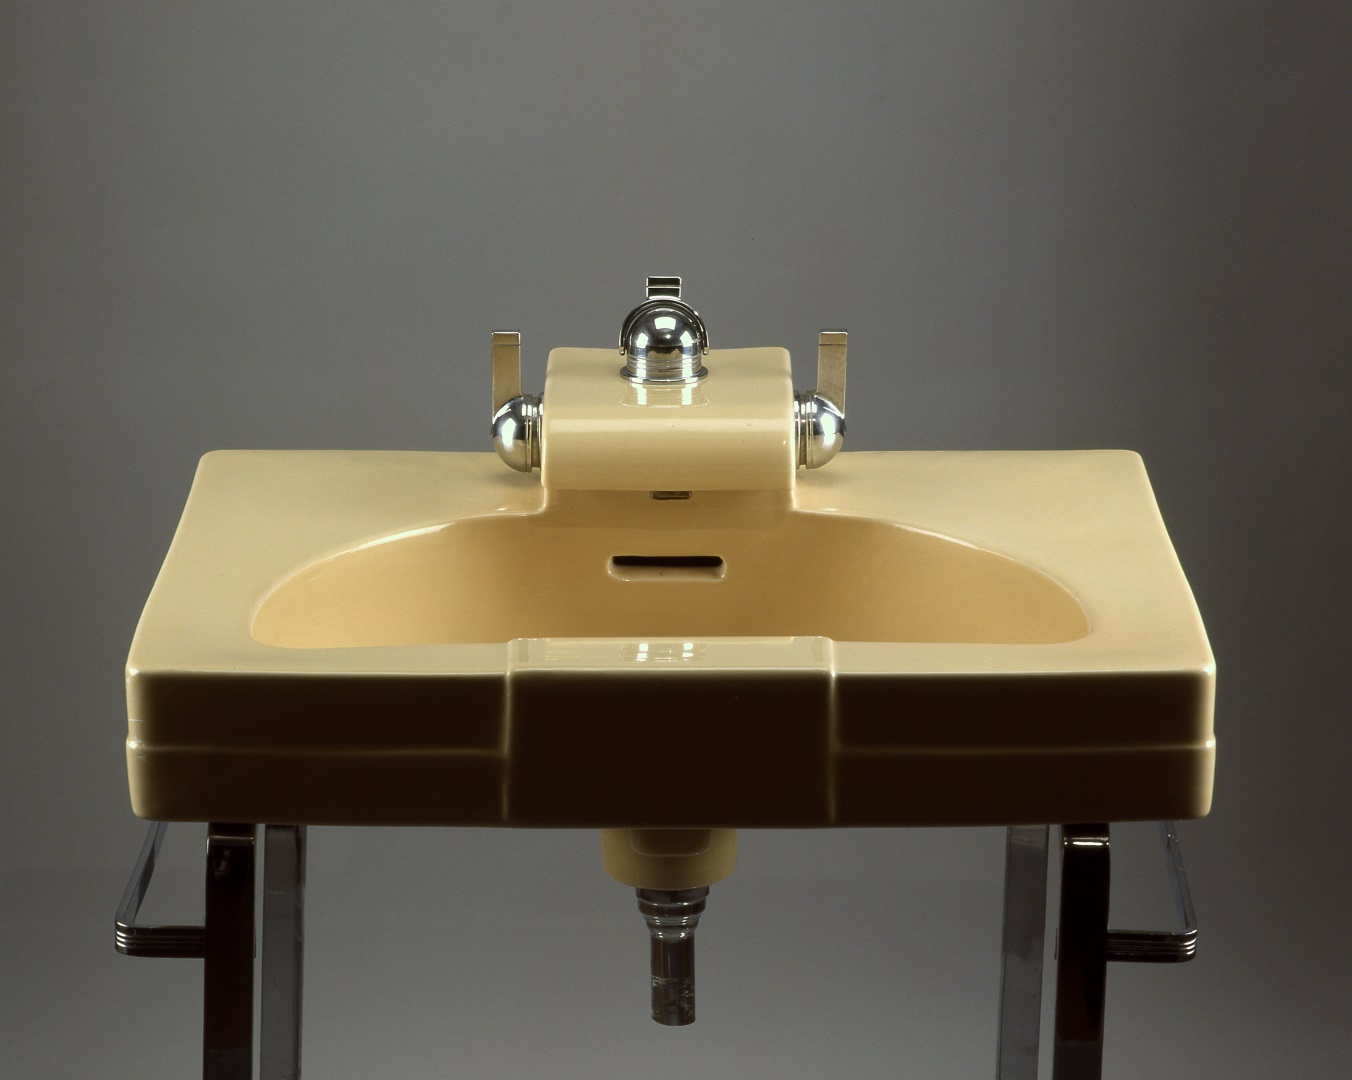 Rectangular bathroom sink with semicircular basin and dome-shaped shiny metal fixtures set on a stand of strap steel.